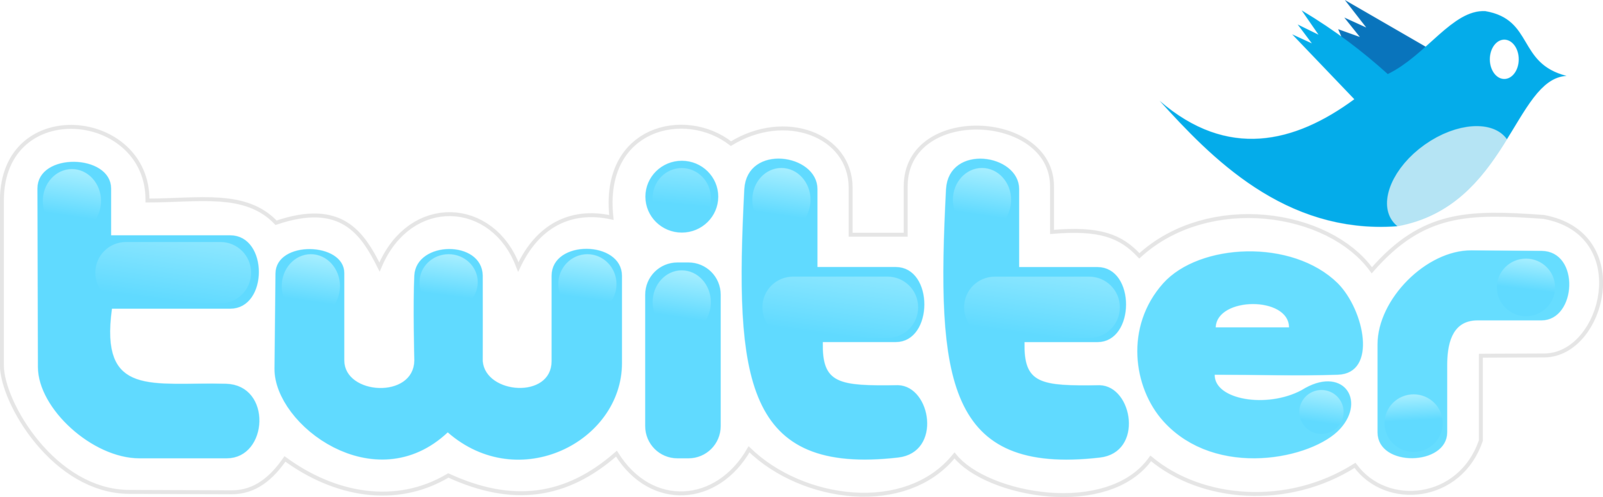 Twitter logo png transparent.  latest icon gif